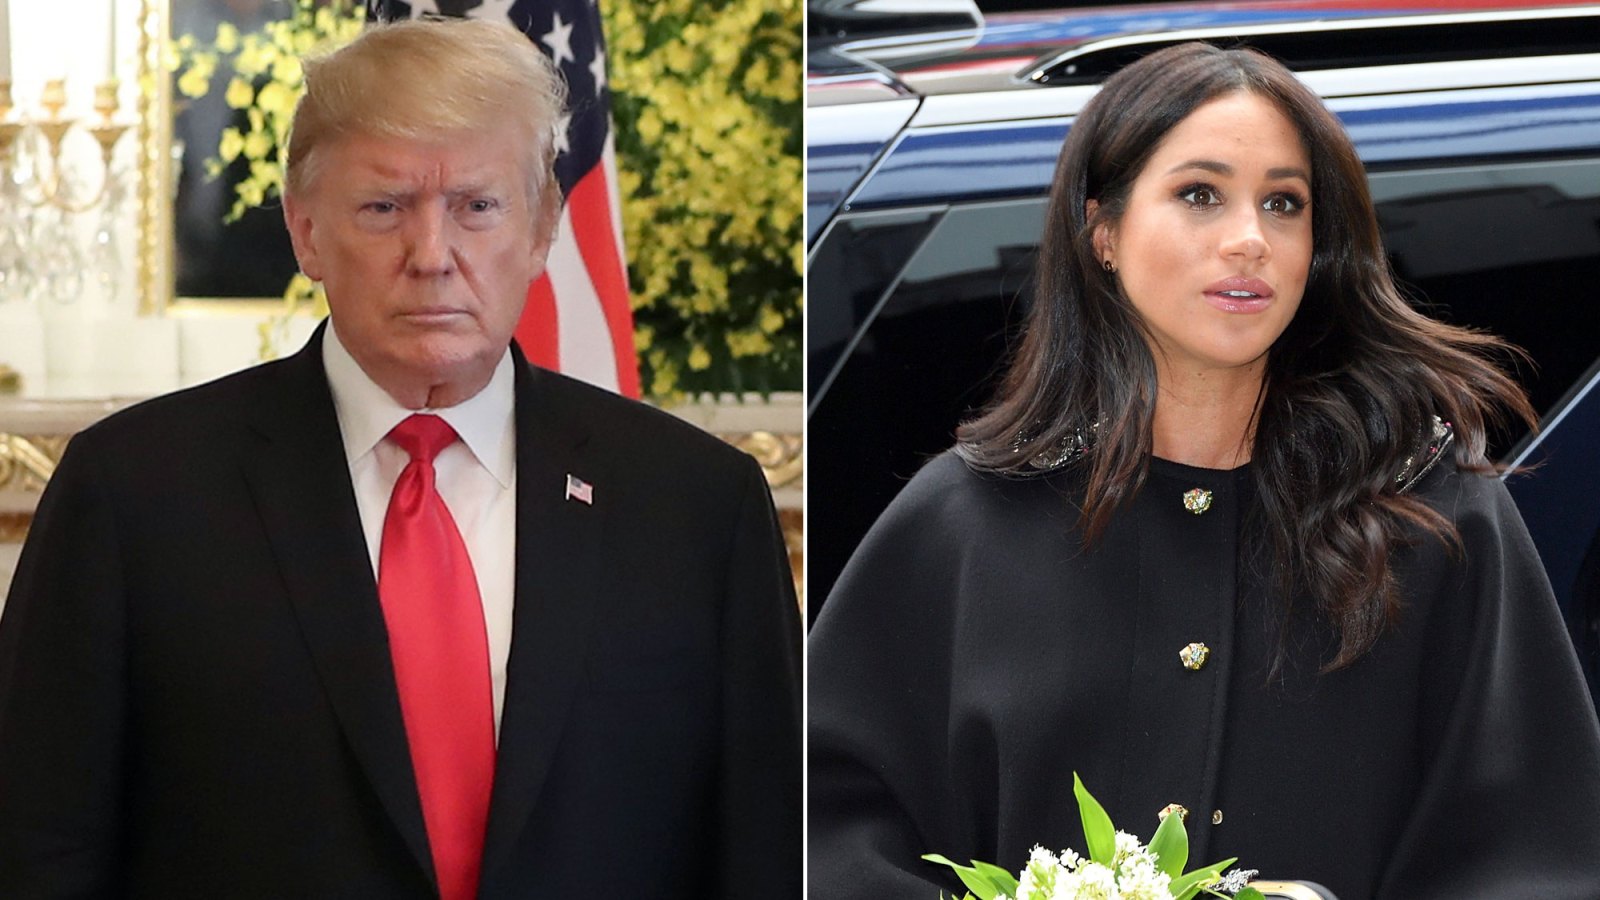 President Donald Trump Calls Duchess Meghan 'Nasty' After Her Presidential Campaign Criticism